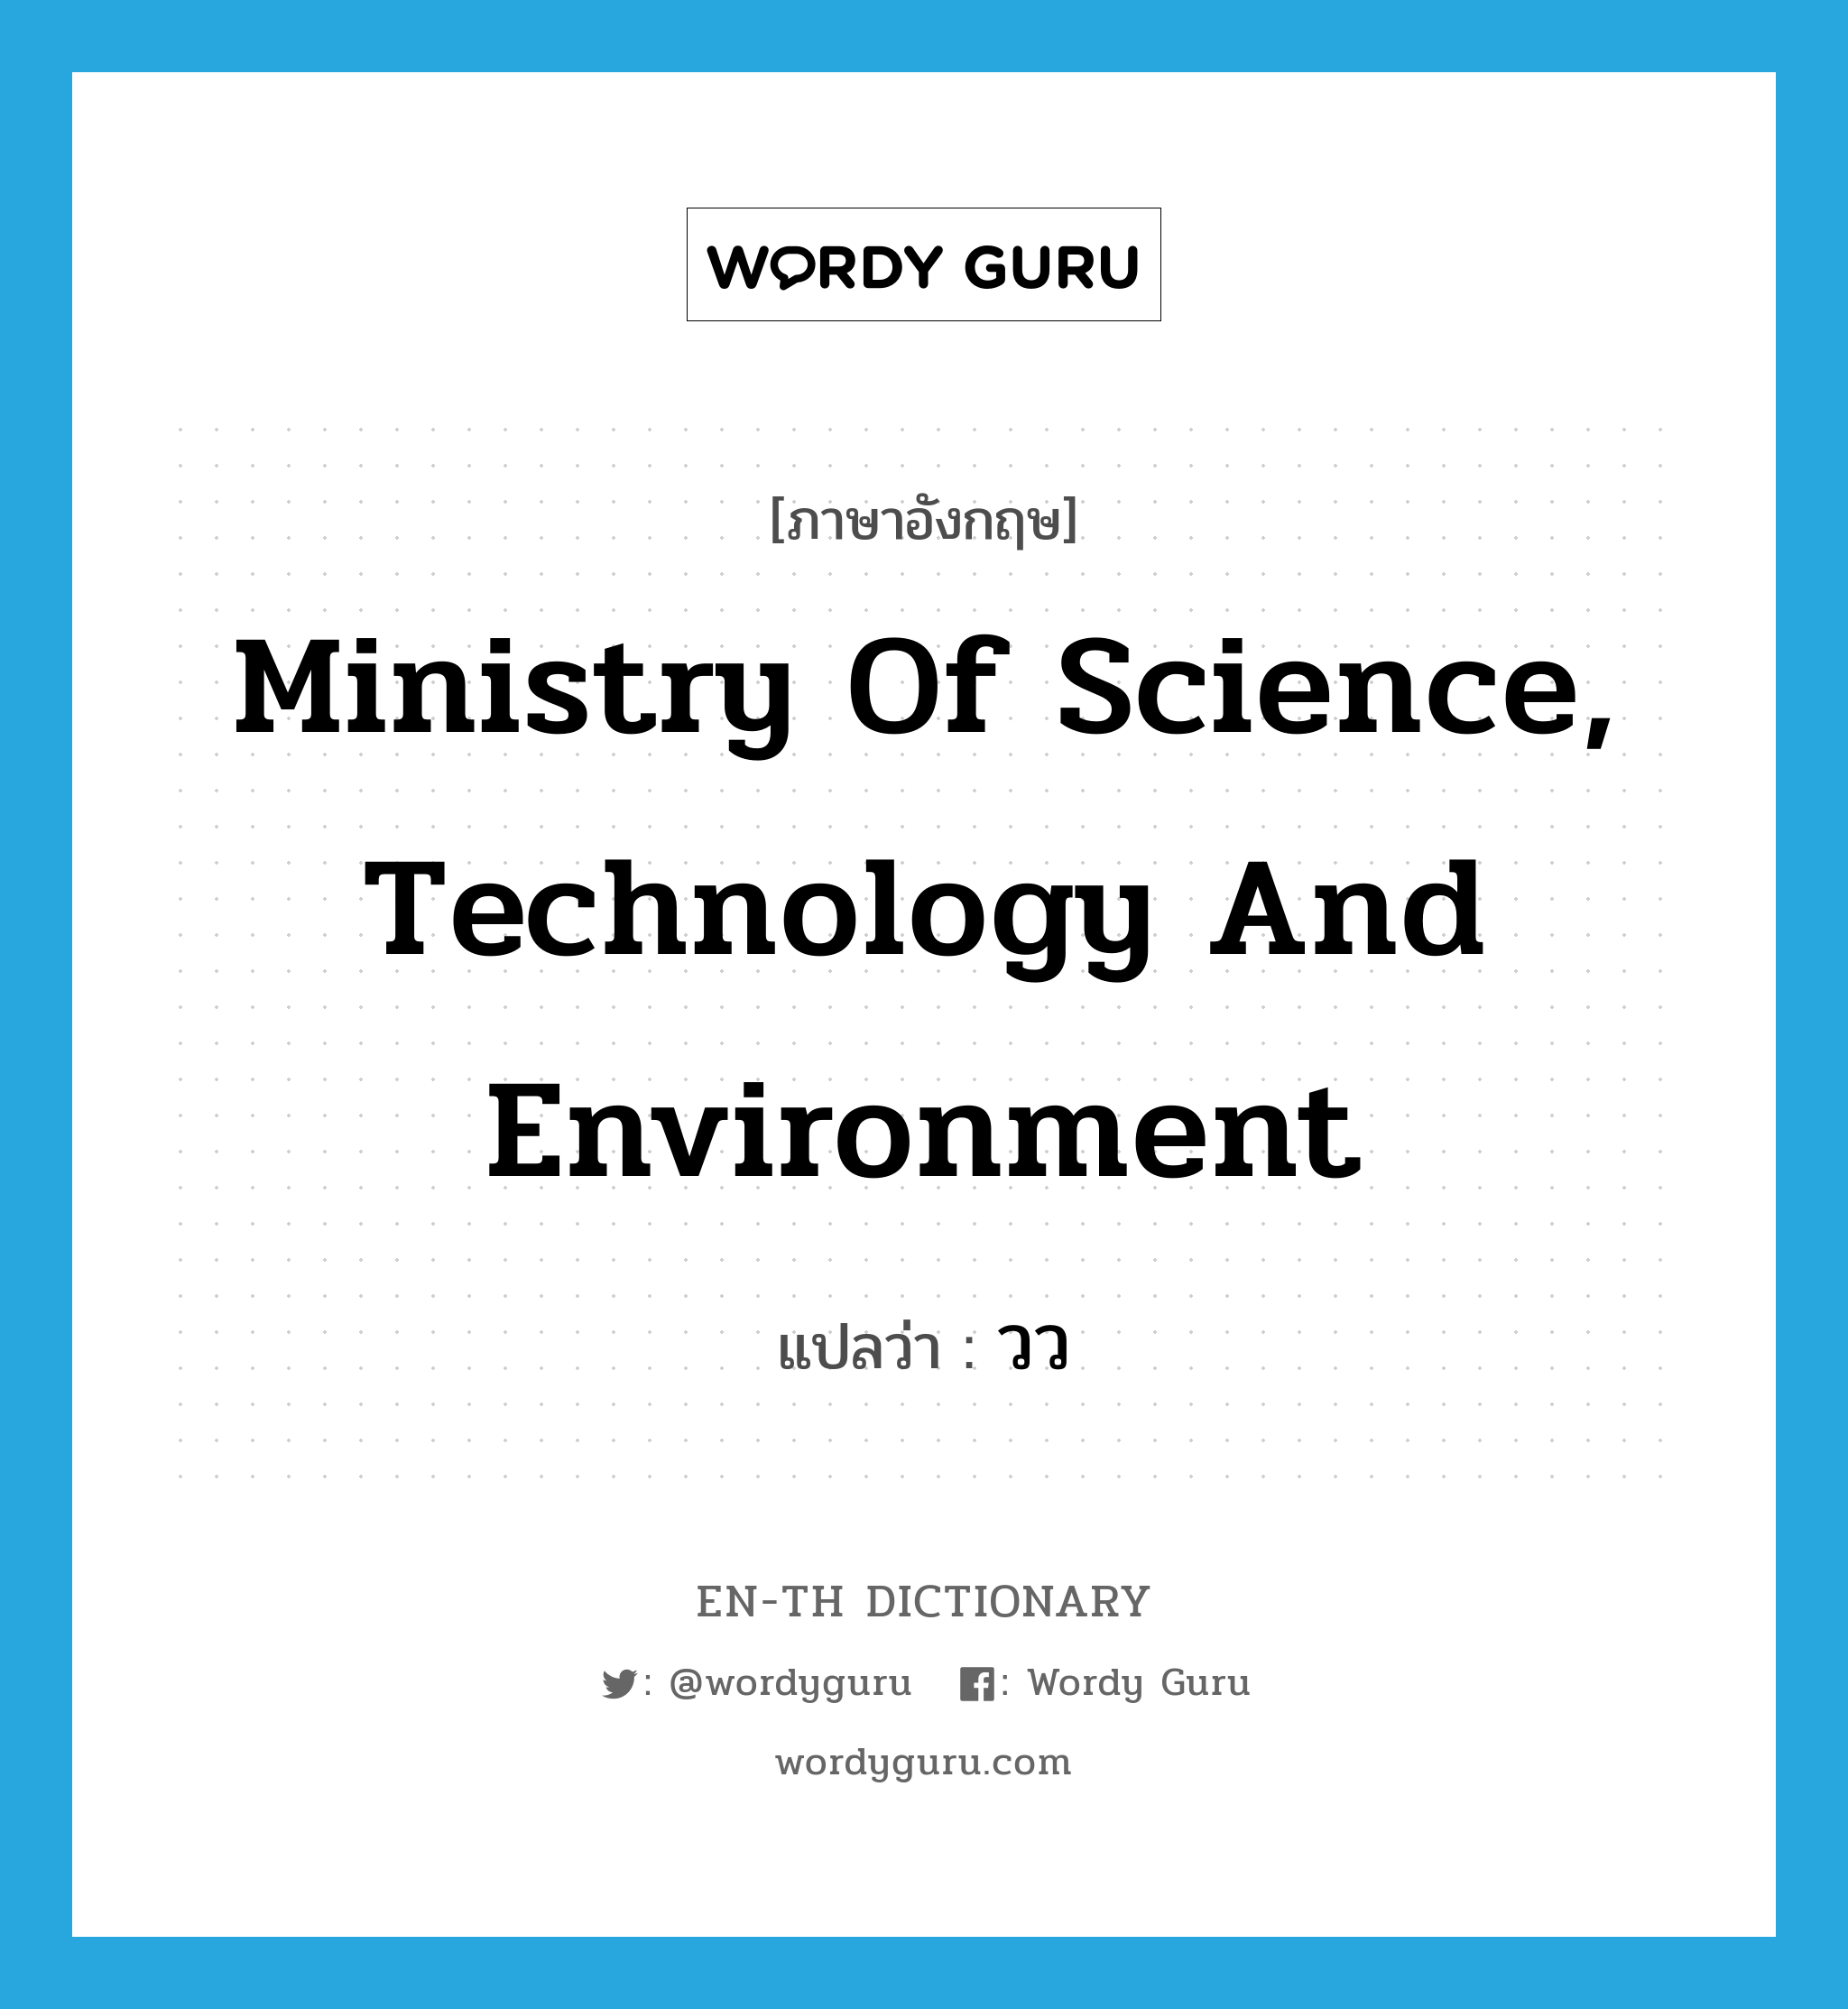 Ministry of Science Technology and Environment แปลว่า?, คำศัพท์ภาษาอังกฤษ Ministry of Science, Technology and Environment แปลว่า วว ประเภท N หมวด N